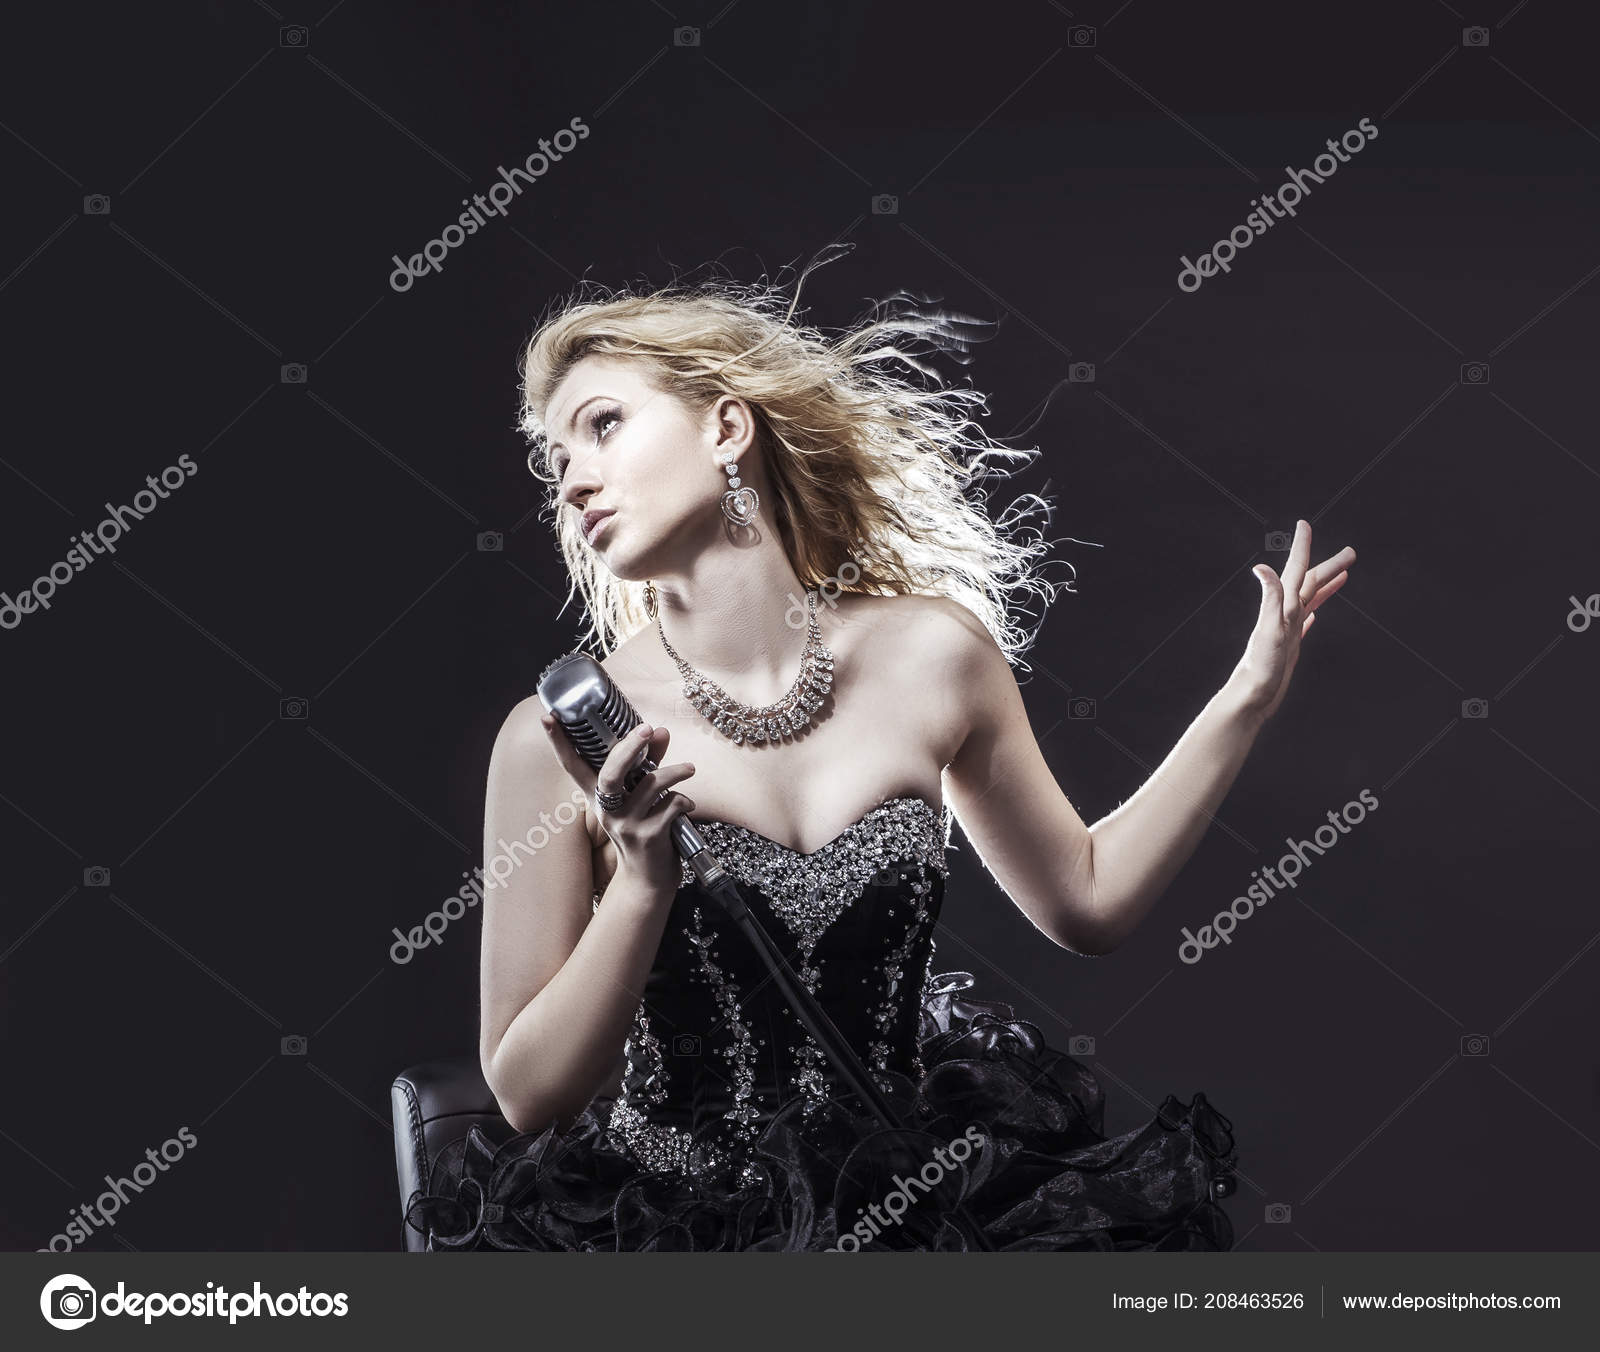 Beautiful Blonde Woman Singer In A Black Dress Holding A